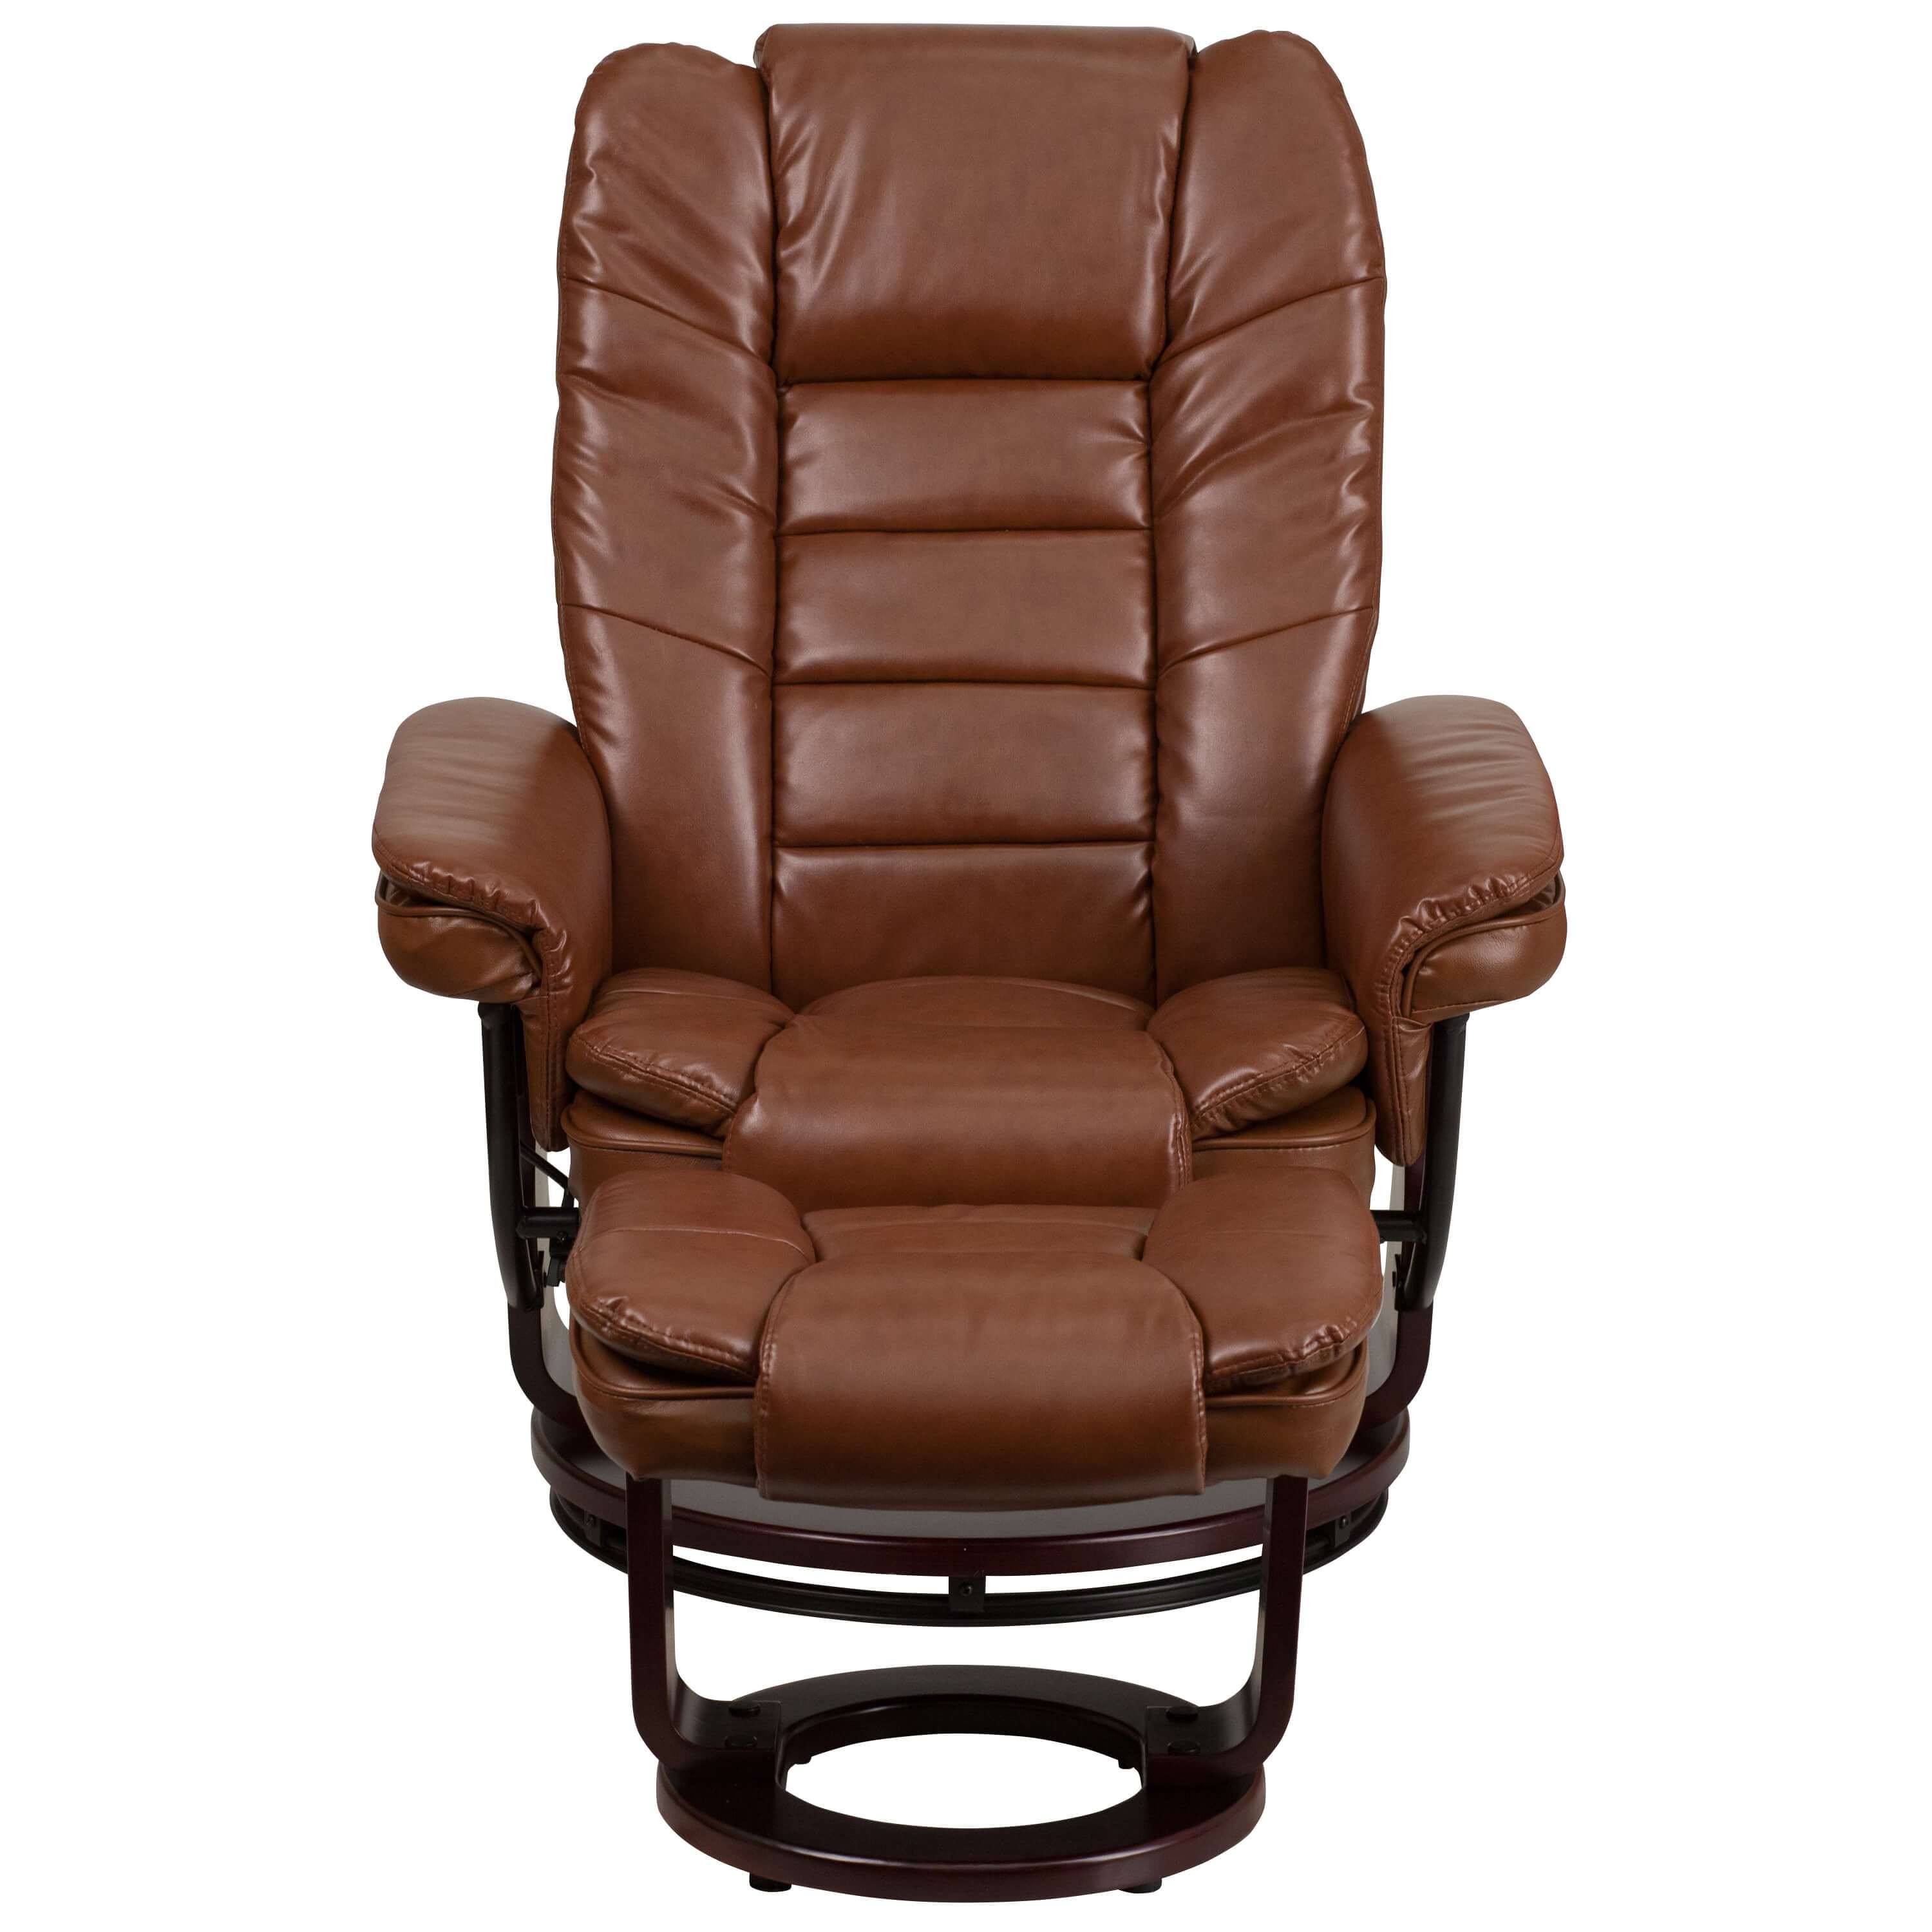 Contemporary recliner chair front view